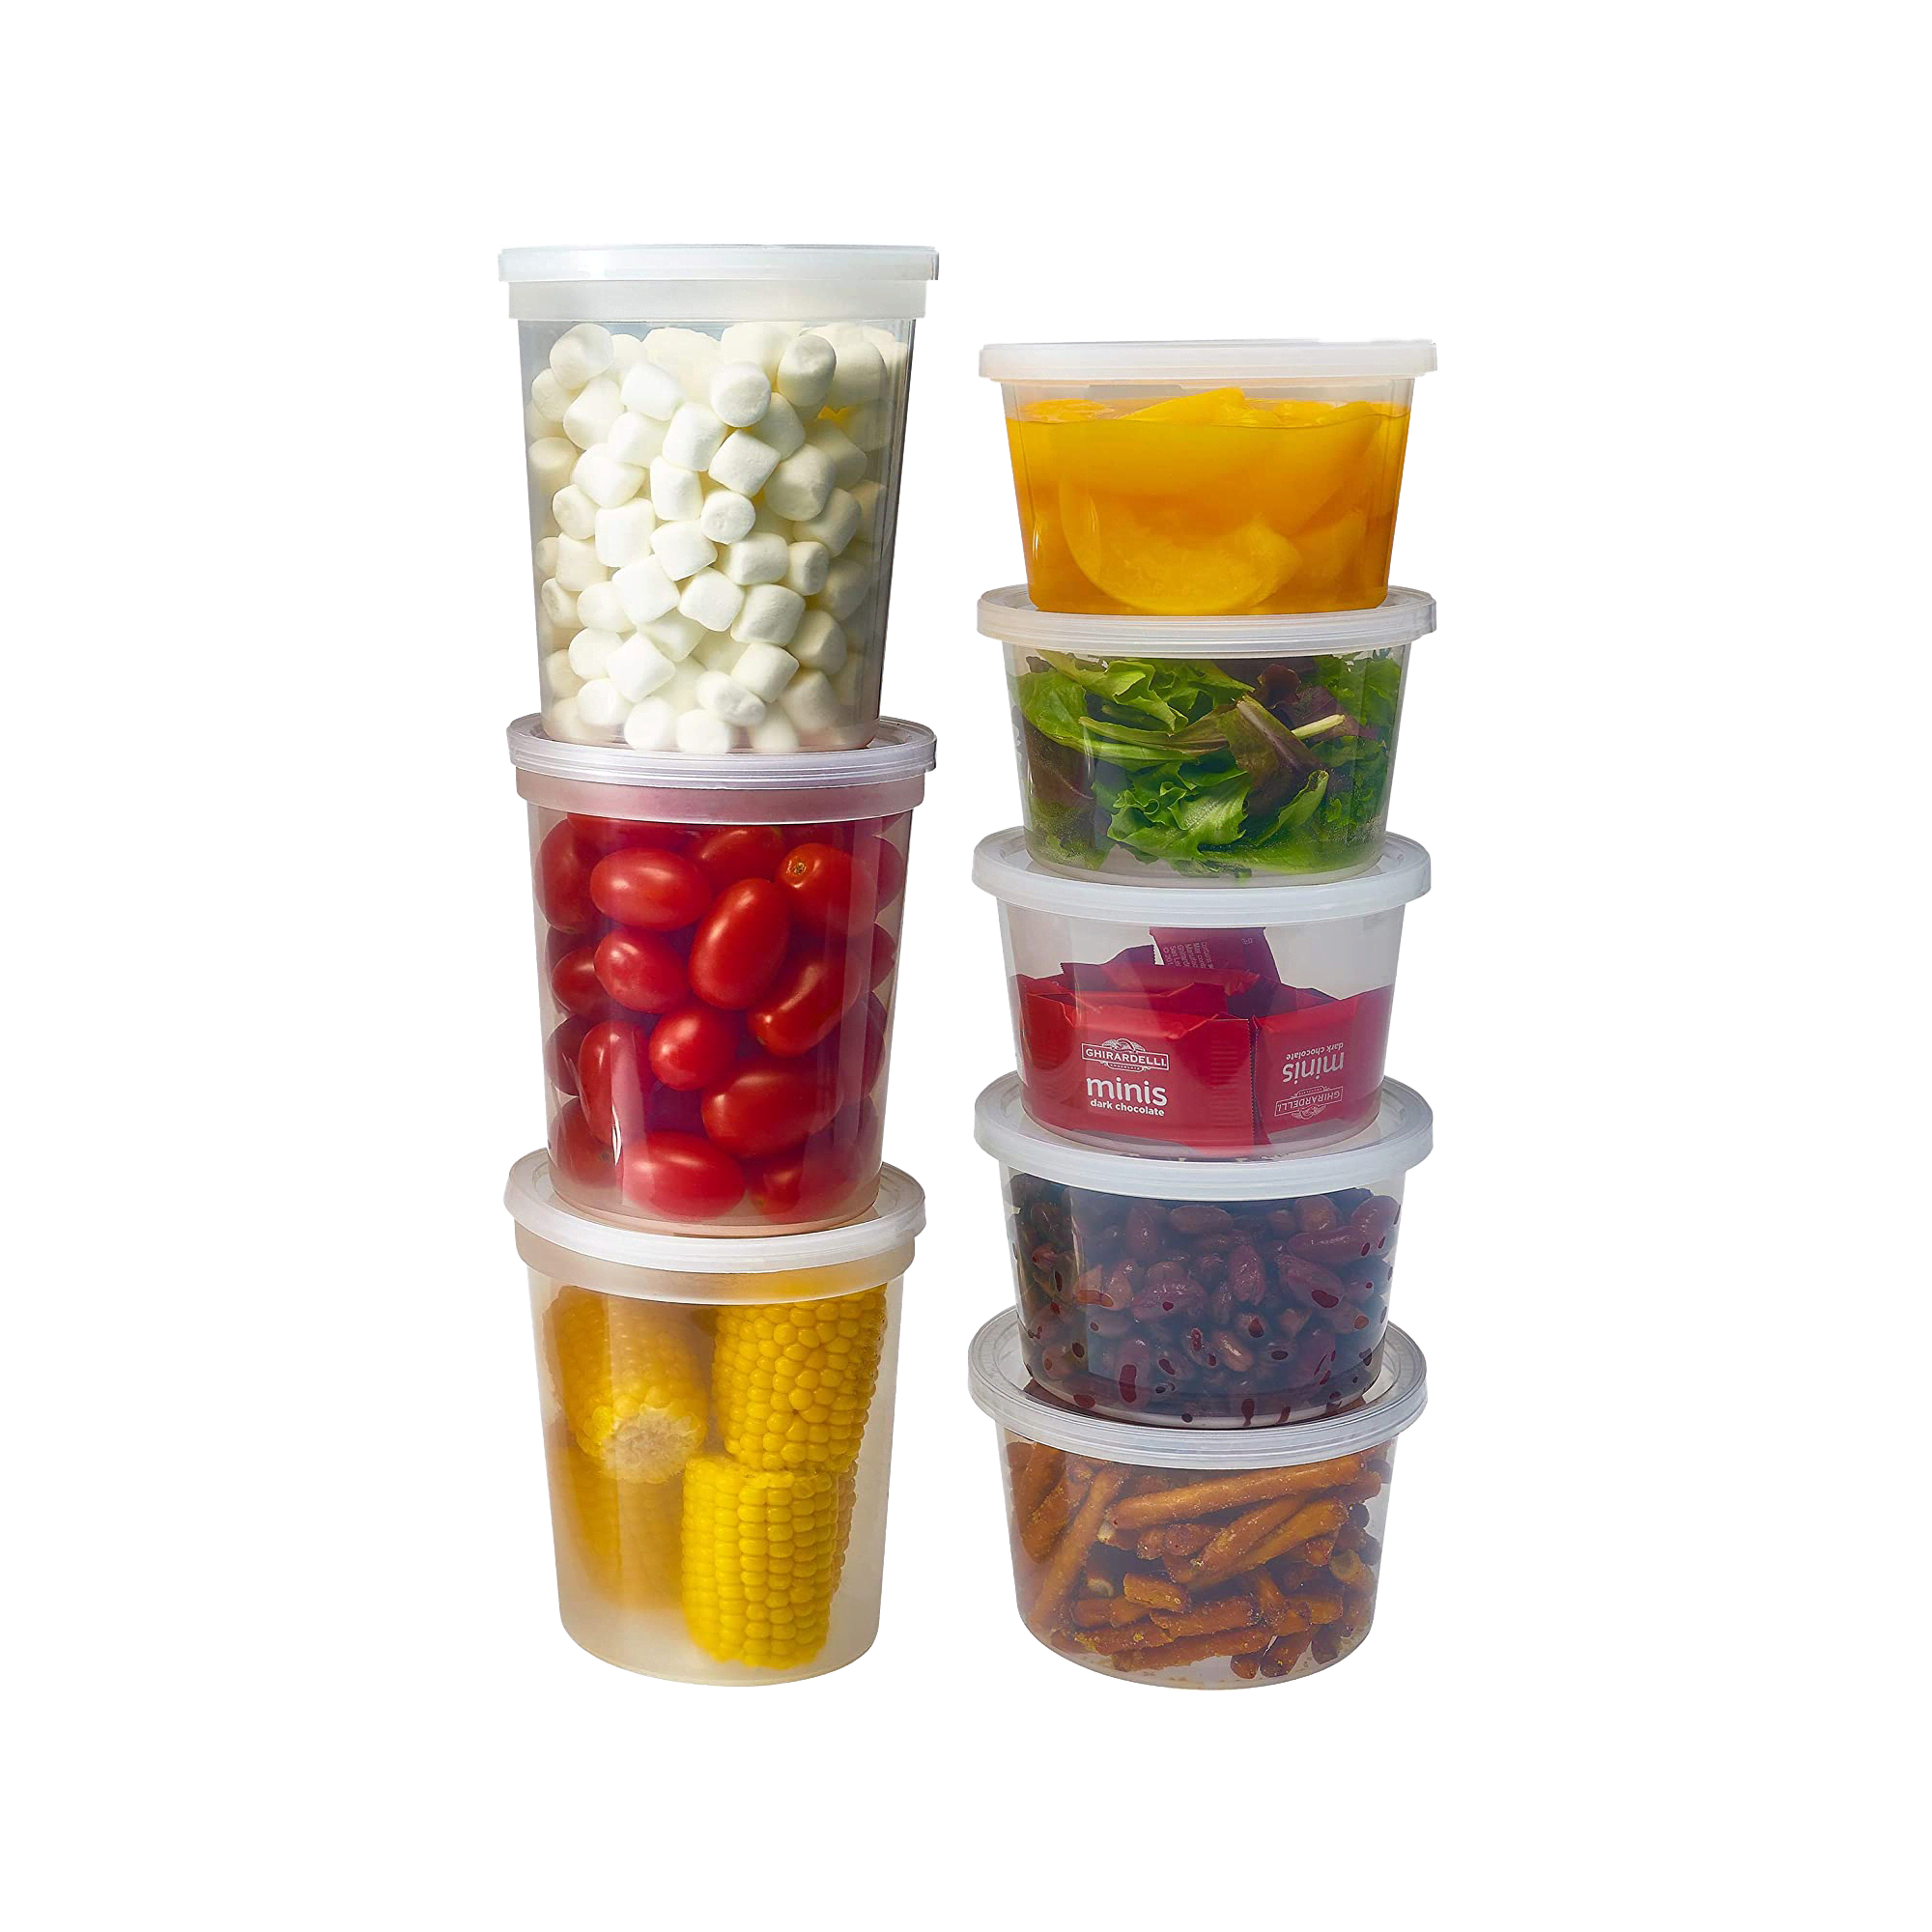 Best Food Storage Containers in 2022